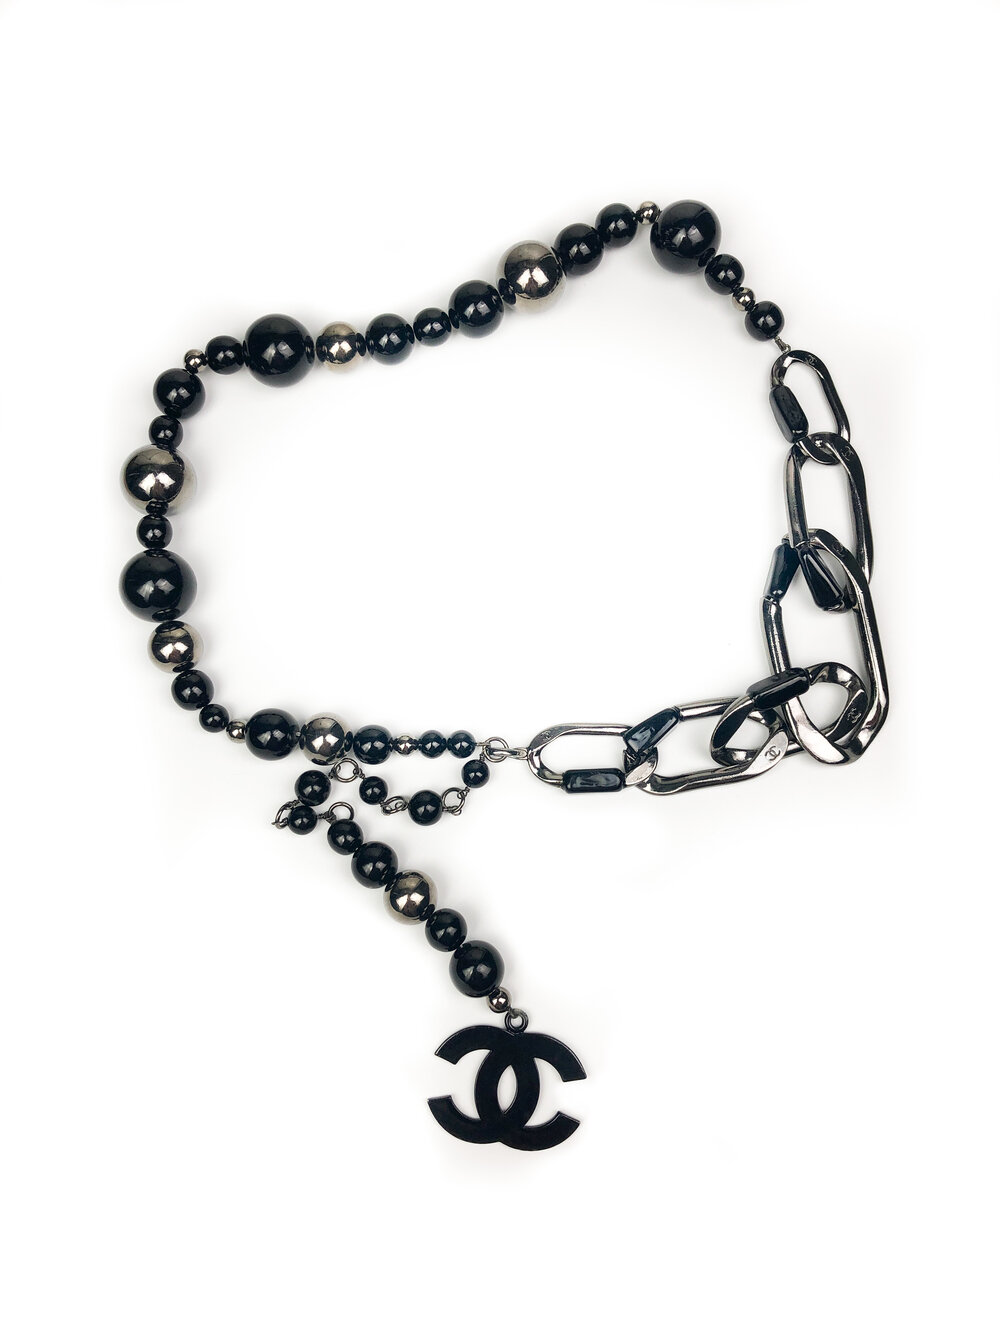 DECADES INC.: More Chanel for the Holidays!